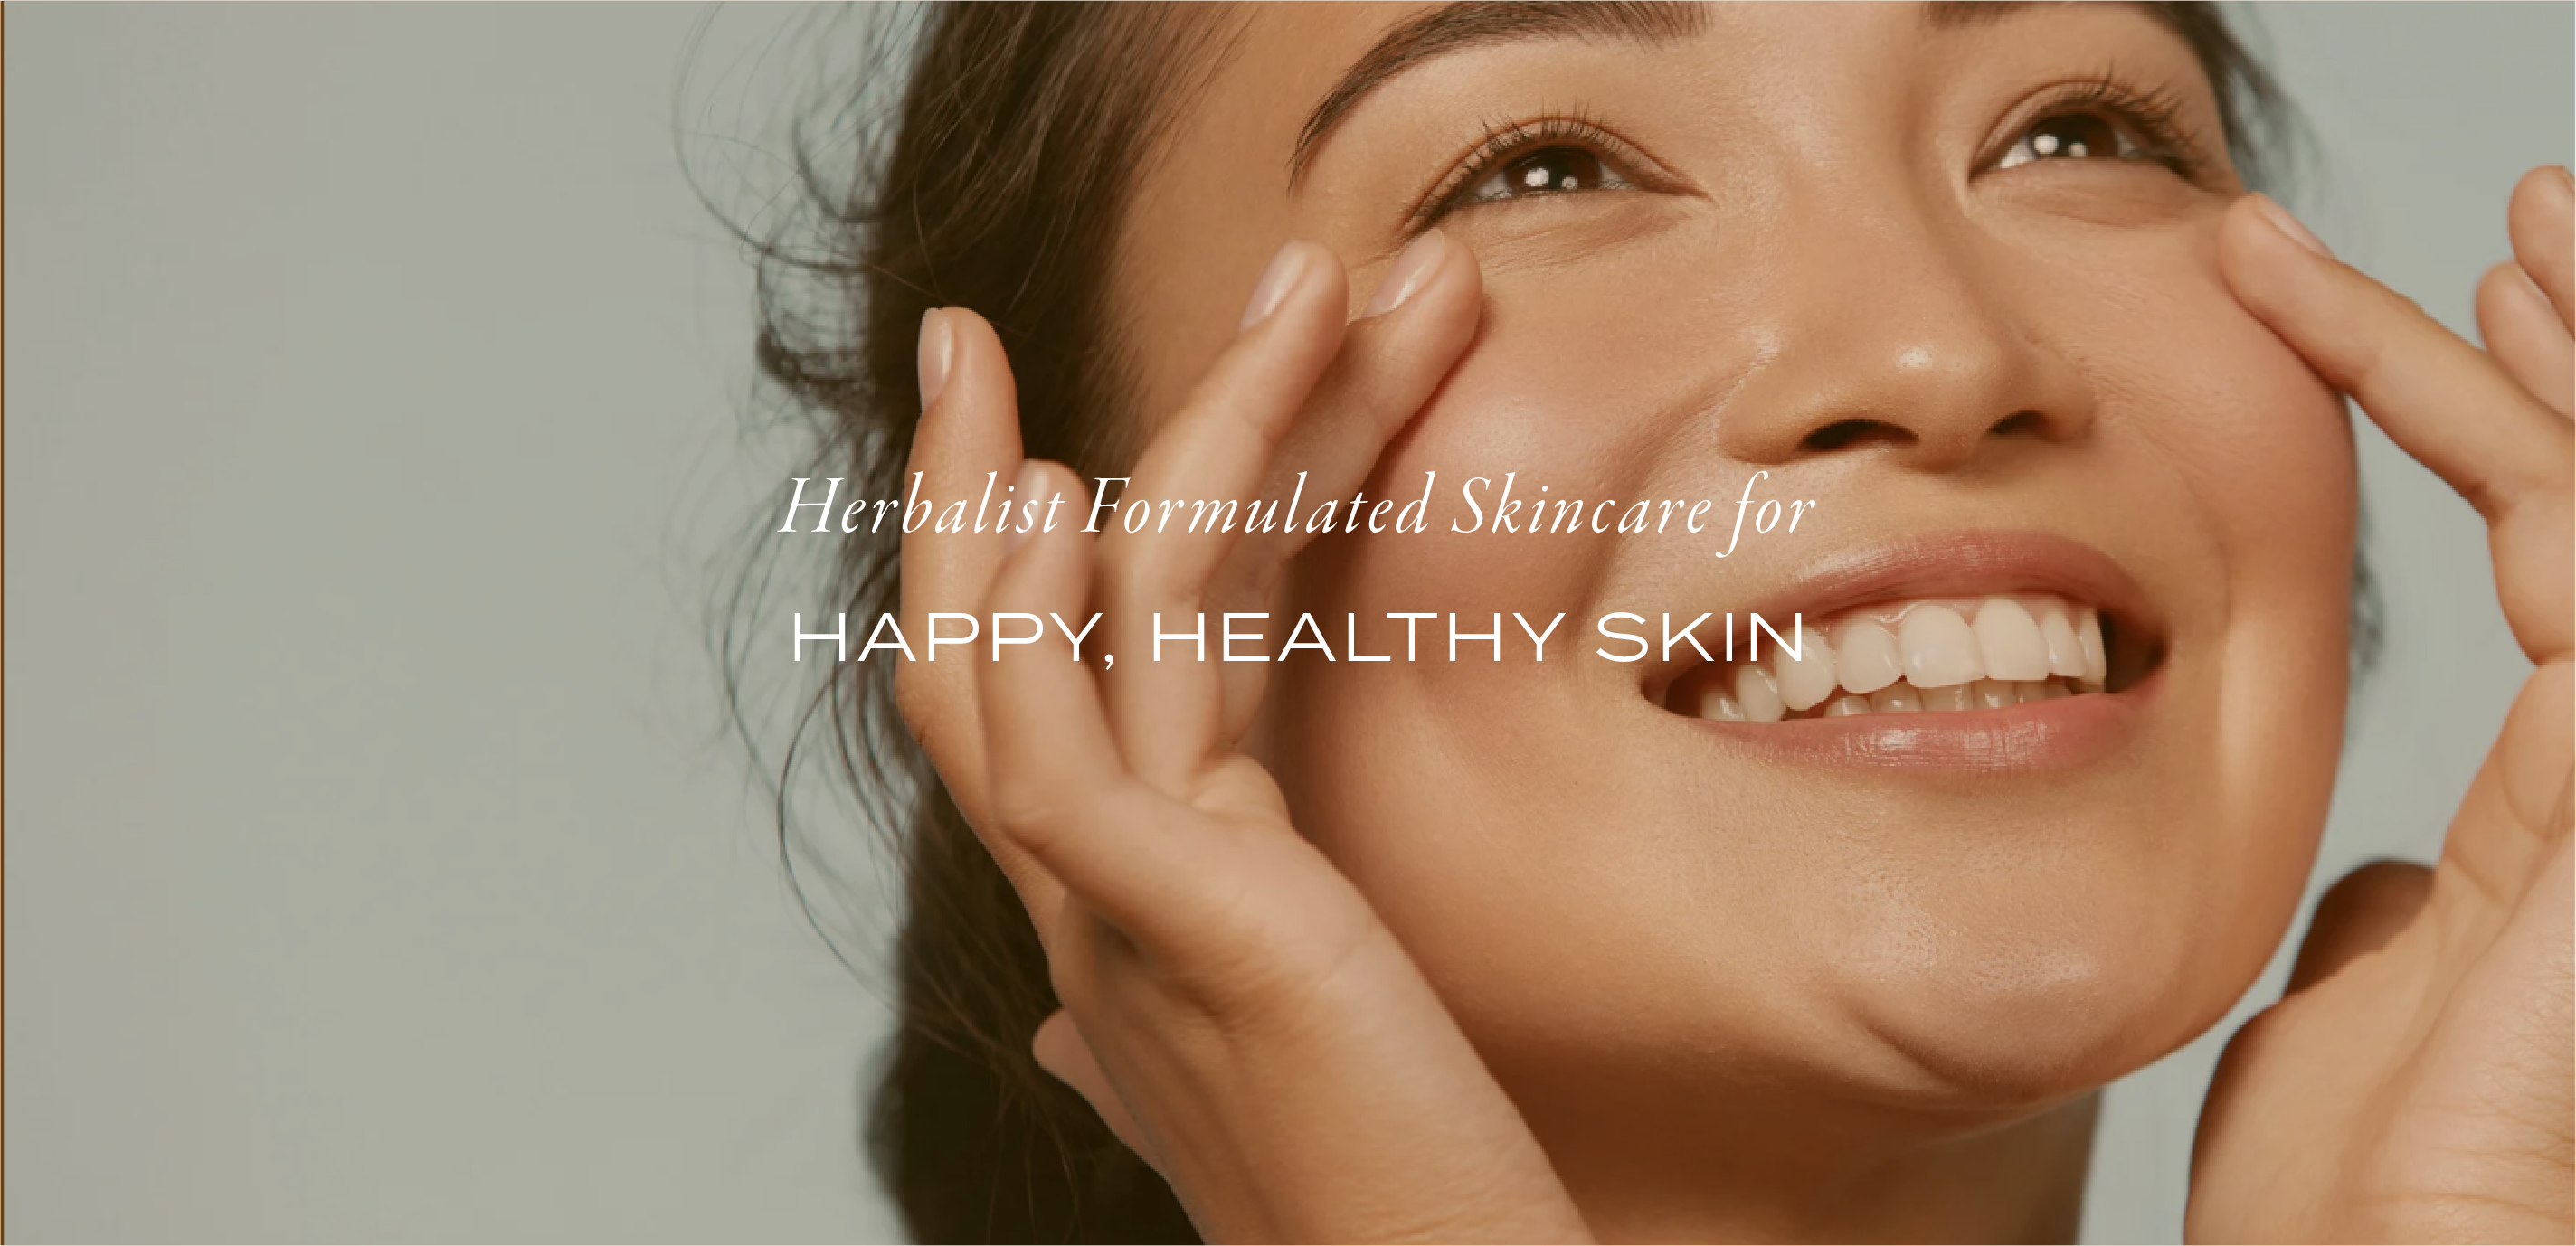 Woman applying moisturizer to face smiling with words on top that say, herbalist formulated skincare for happy, healthy skin